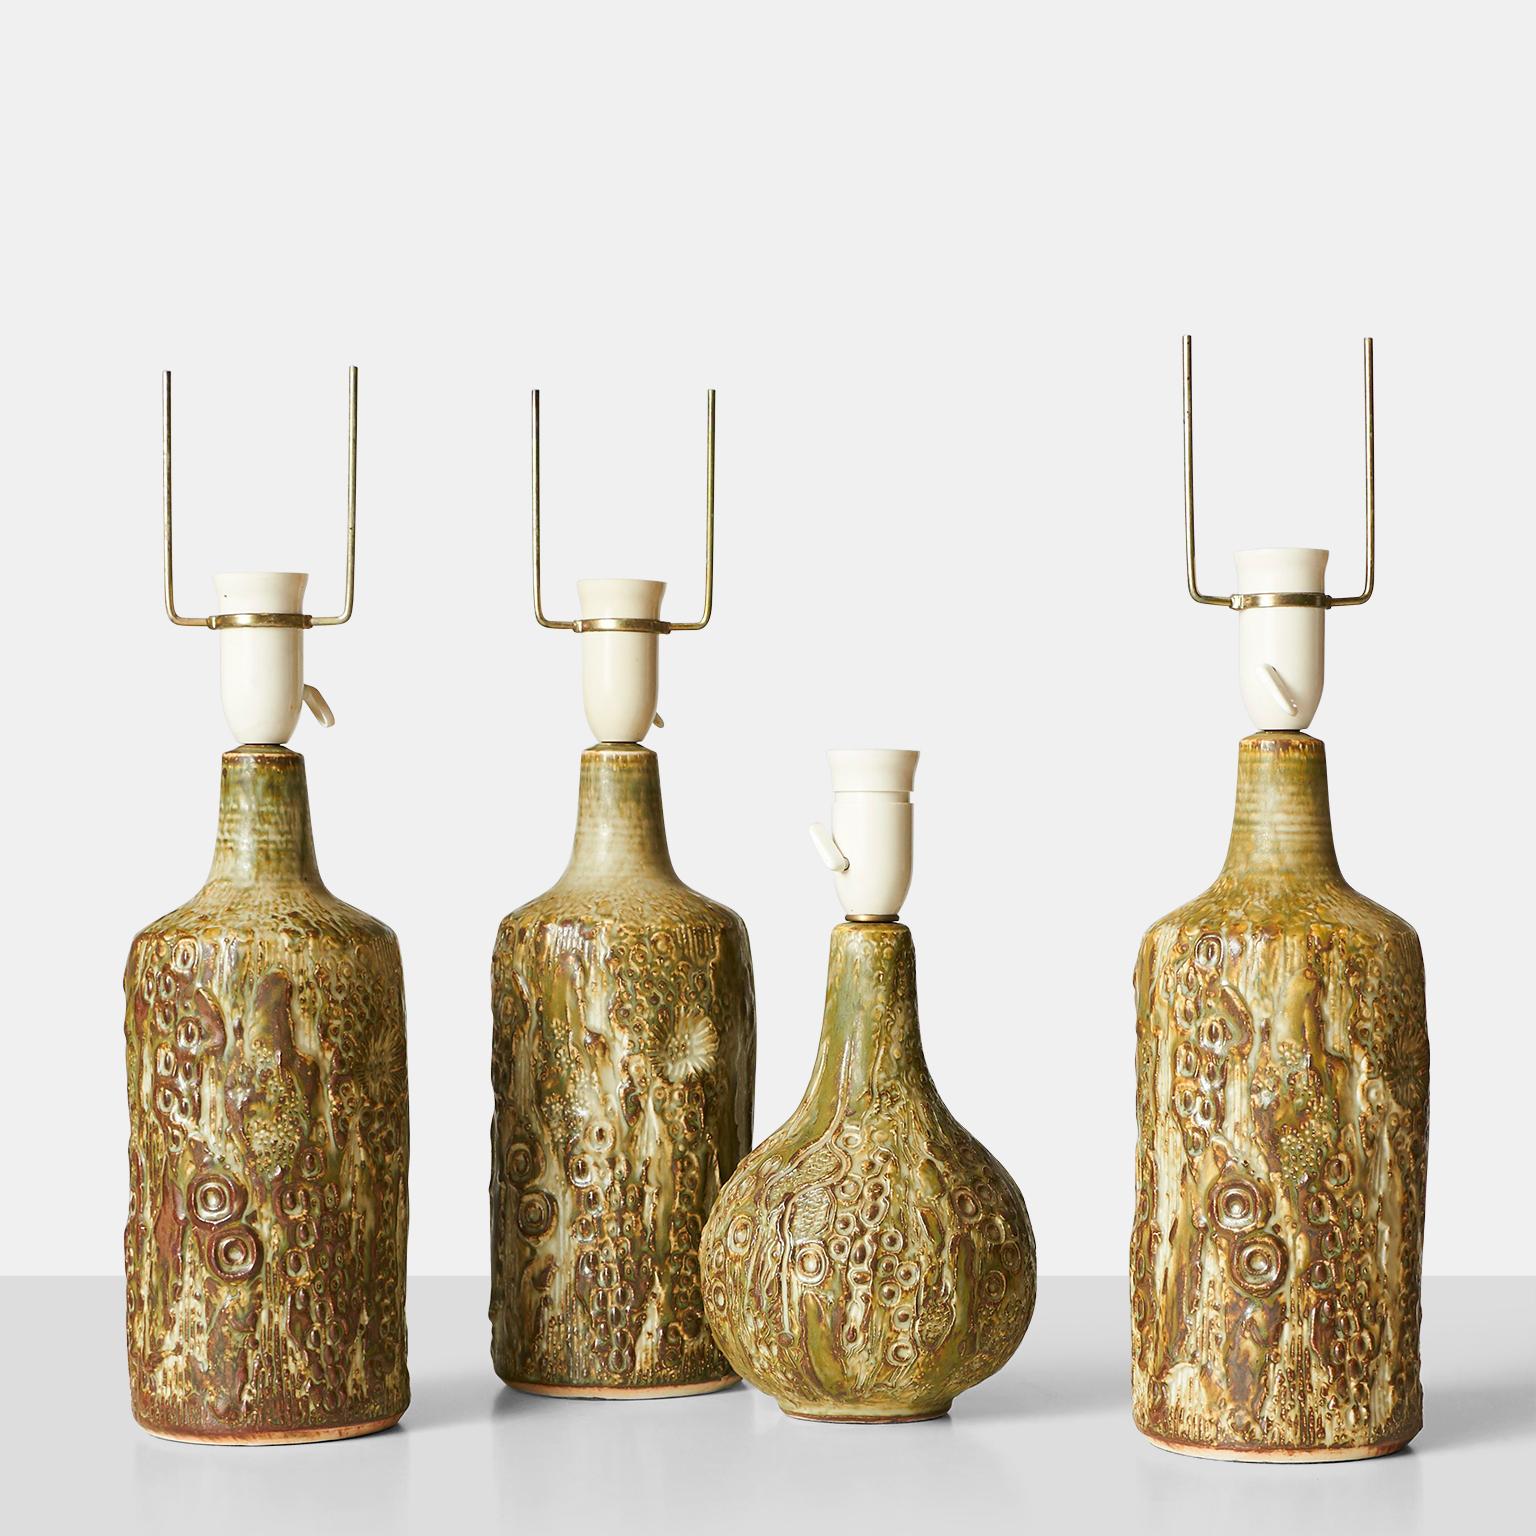 Four stoneware table lamps by Jorgen Mogensen for his own studio. Organic textures to the body of the lamps and earthen colors that were typical of the style. The dimensions listed do not include the harps. The lamps are sold with the harps and